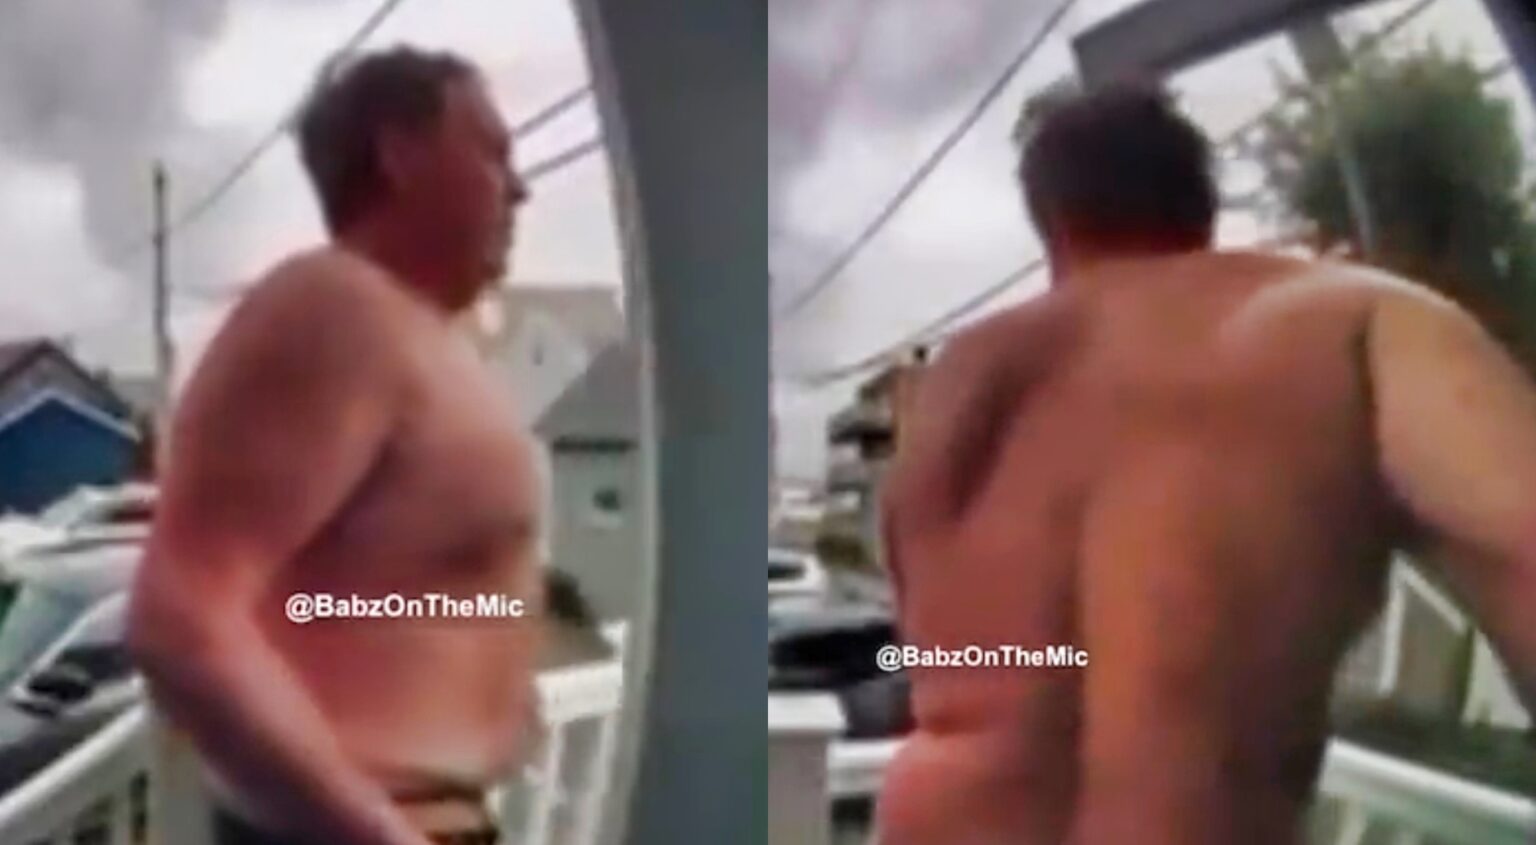 Alarmingly, Leaked Door Cam Footage Appears to Show Patriots Head Coach Bill Belichick Performing a Shirtless “Walk of Shame” (VIDEO)